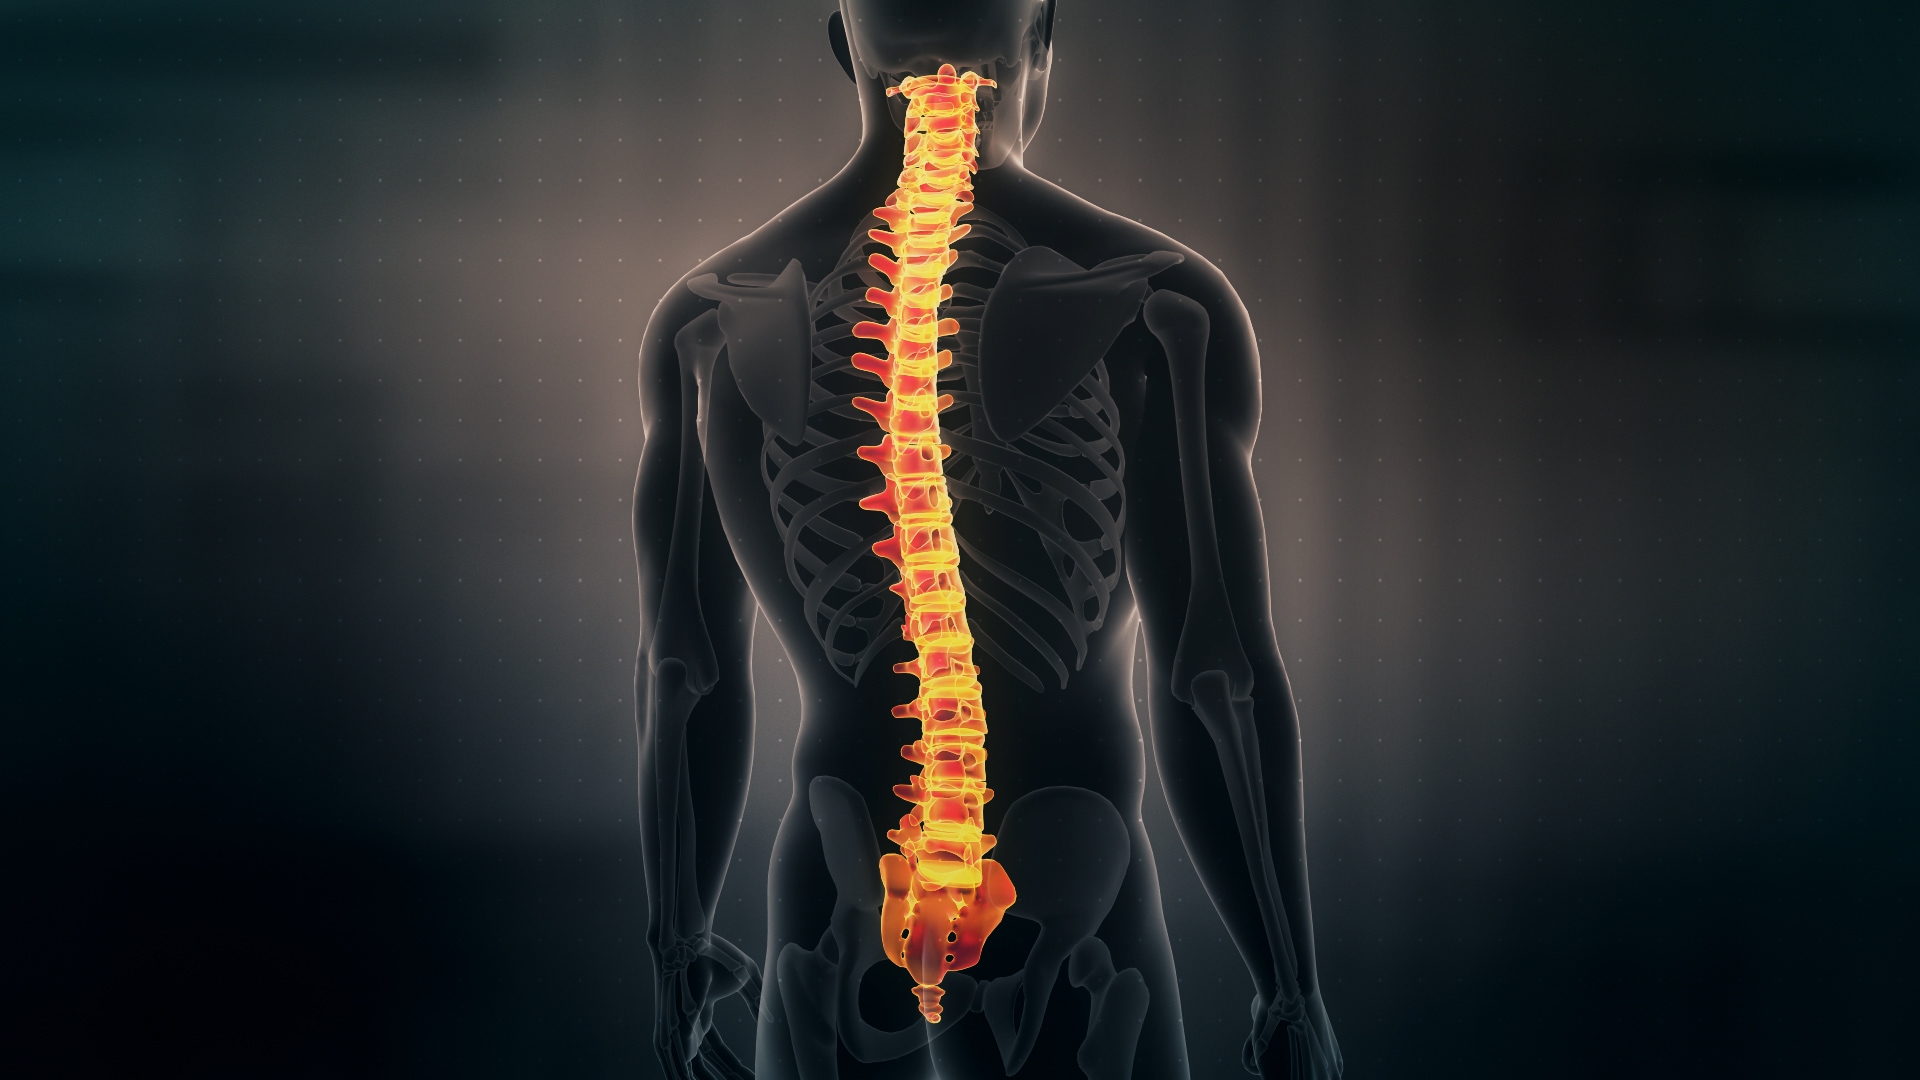 Futuristic Interface Display of Human Male Spinal Cord on dark background